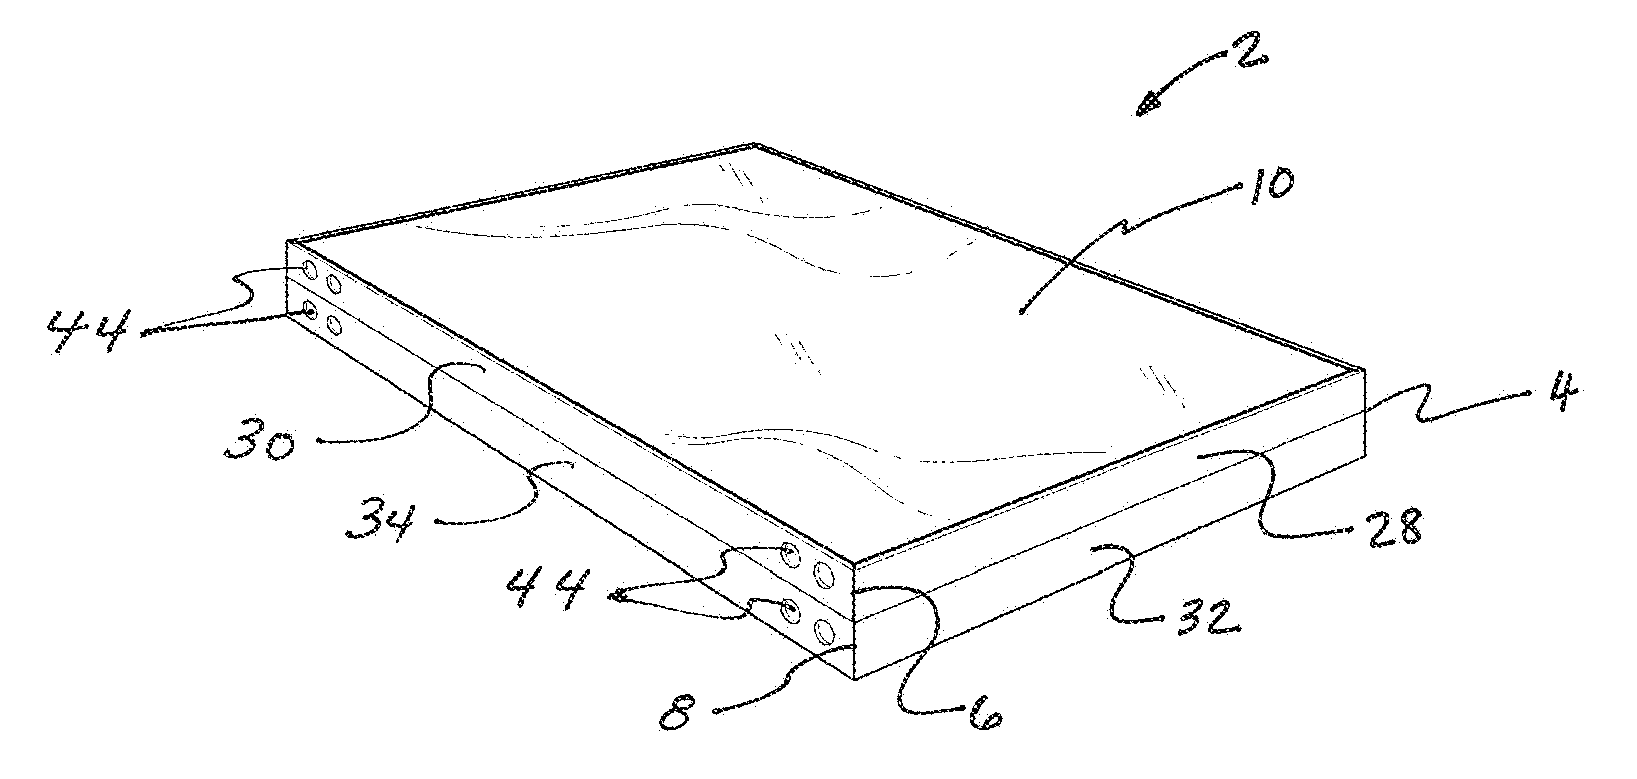 Solar hybrid photovoltaic-thermal collector assembly and method of use